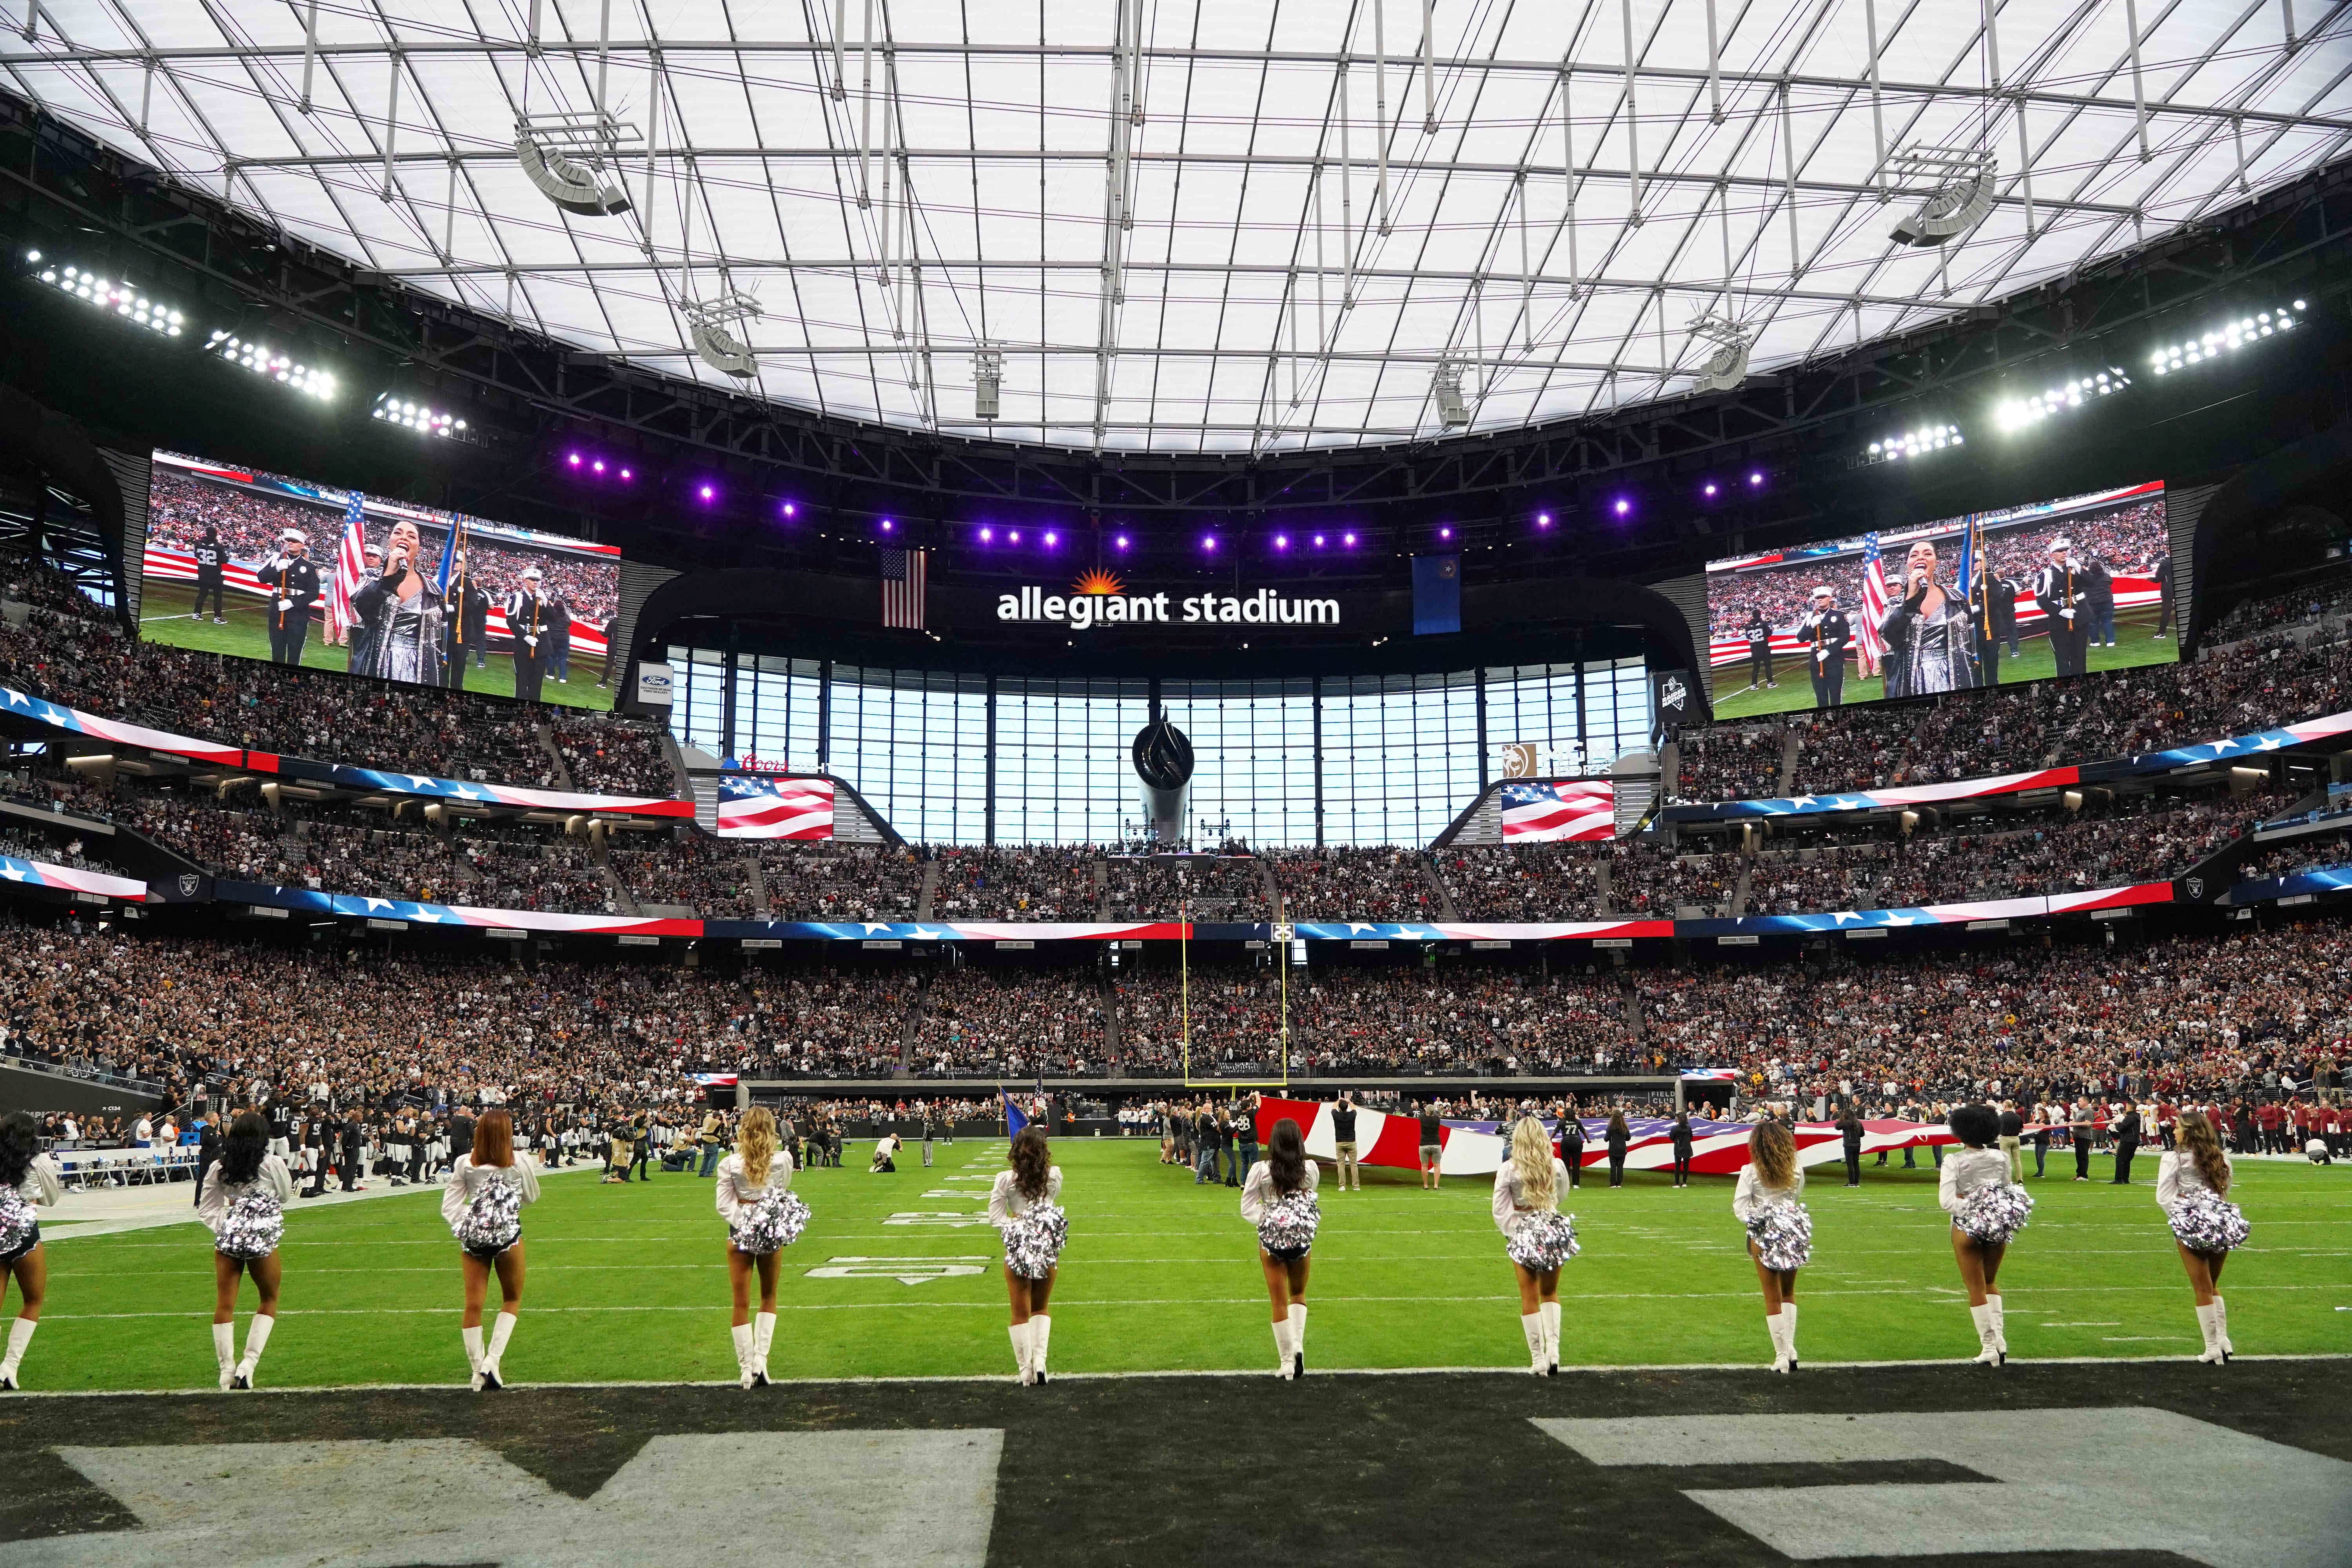 Indoor Football Practice Facility For Las Vegas Raiders—Largest in US